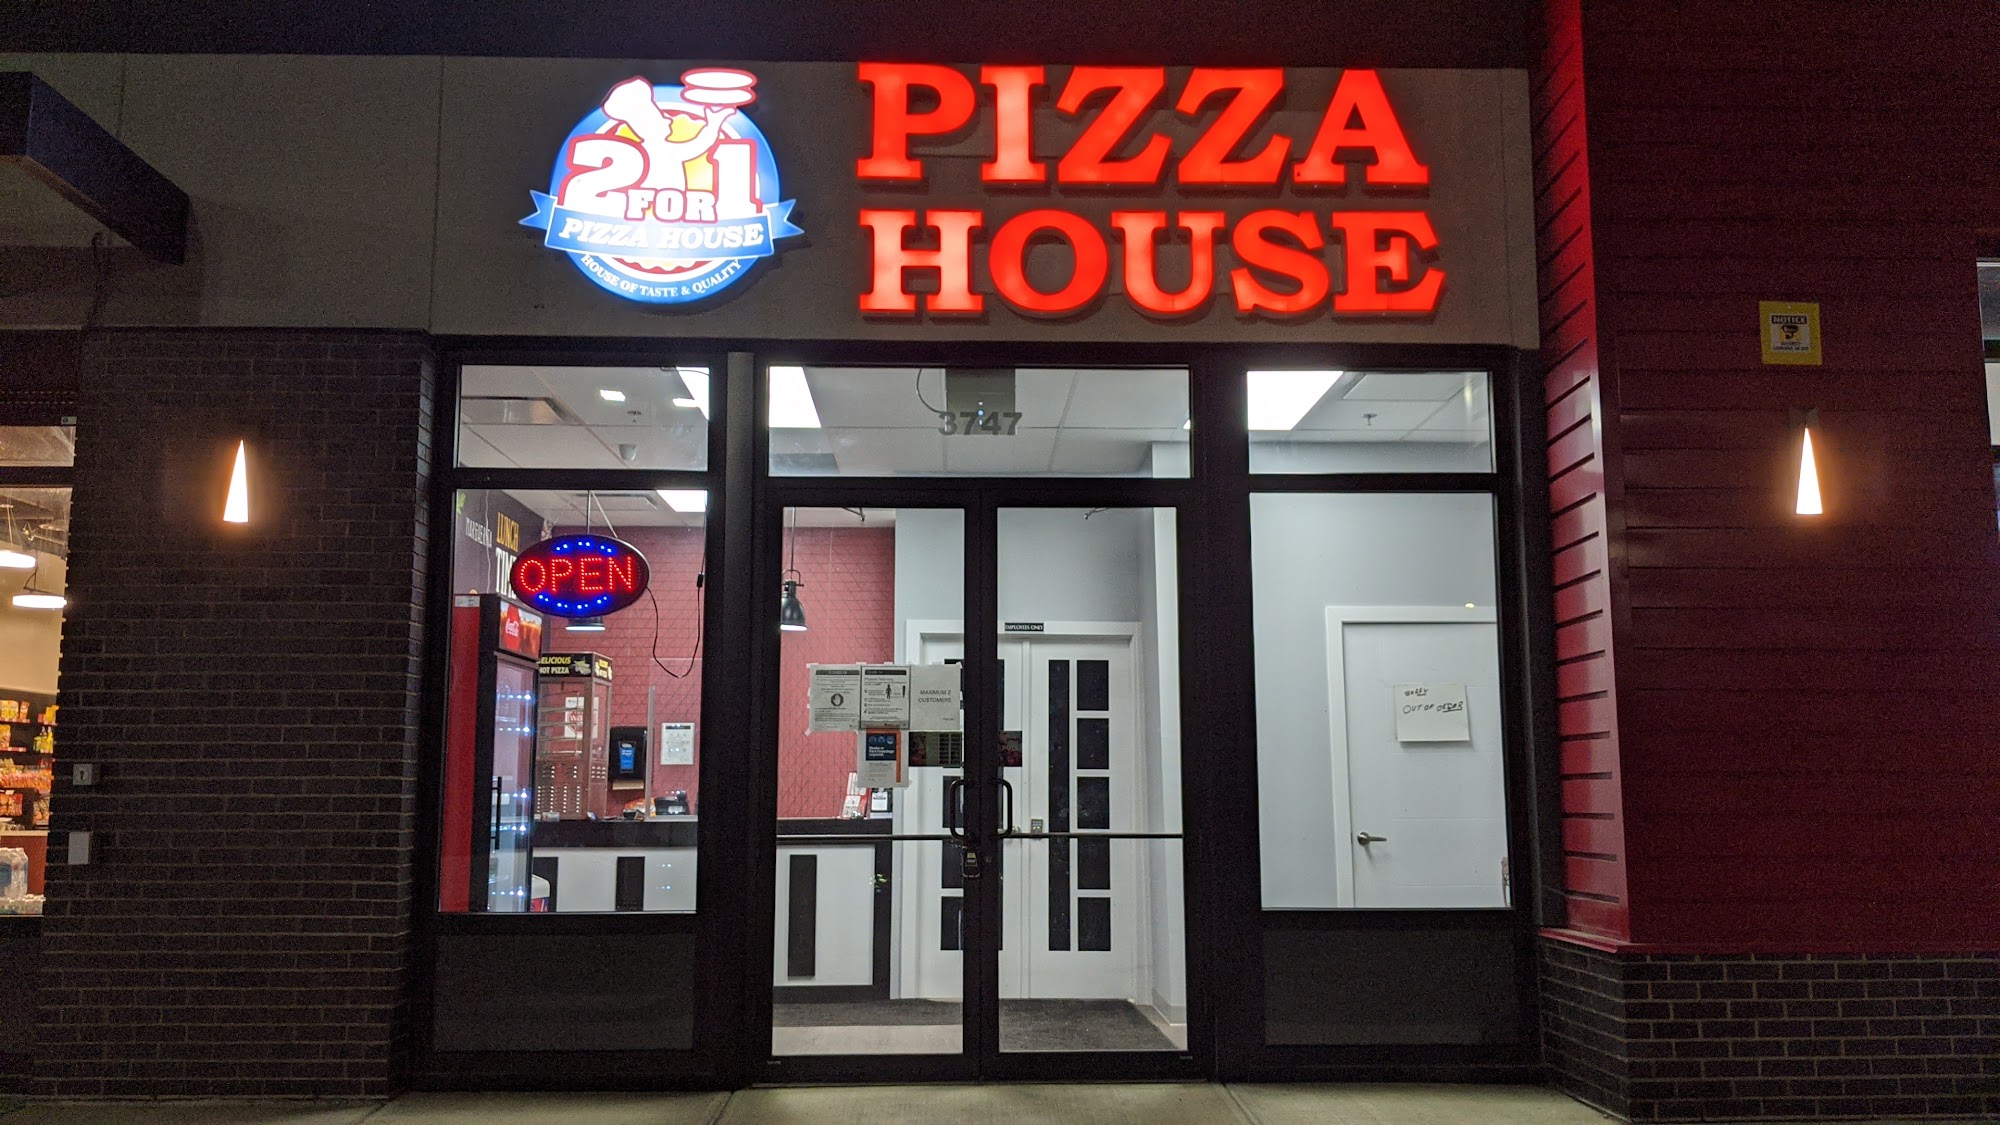 2 For 1 Pizza House